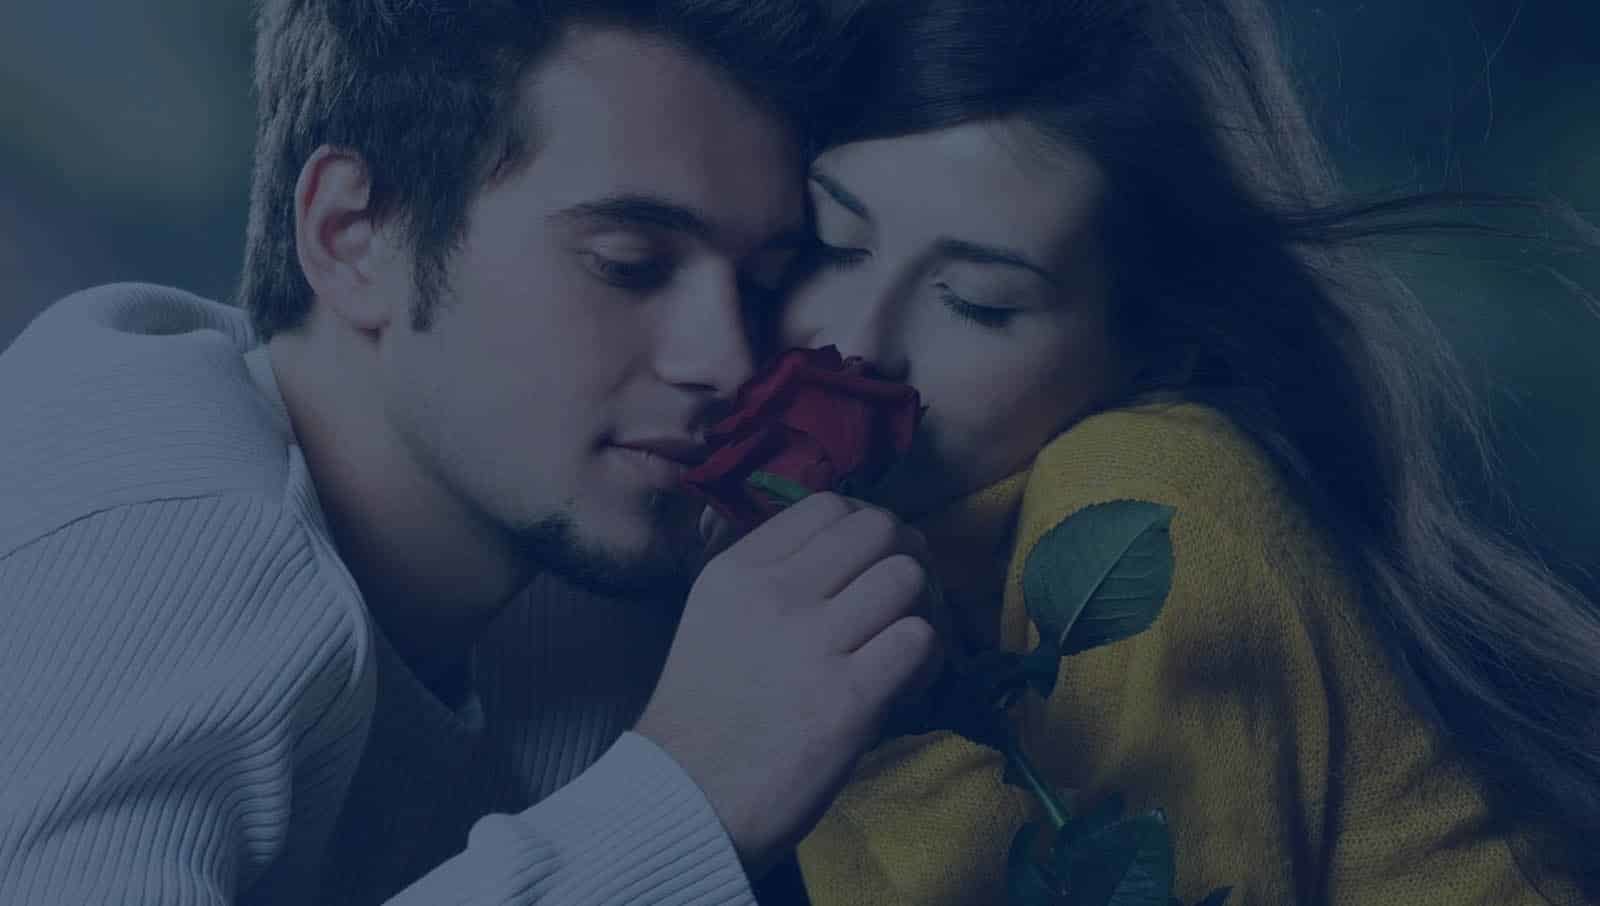 Free passionate couple wallpaper Why men cheat on their girlfriends and women ... 3 reasons